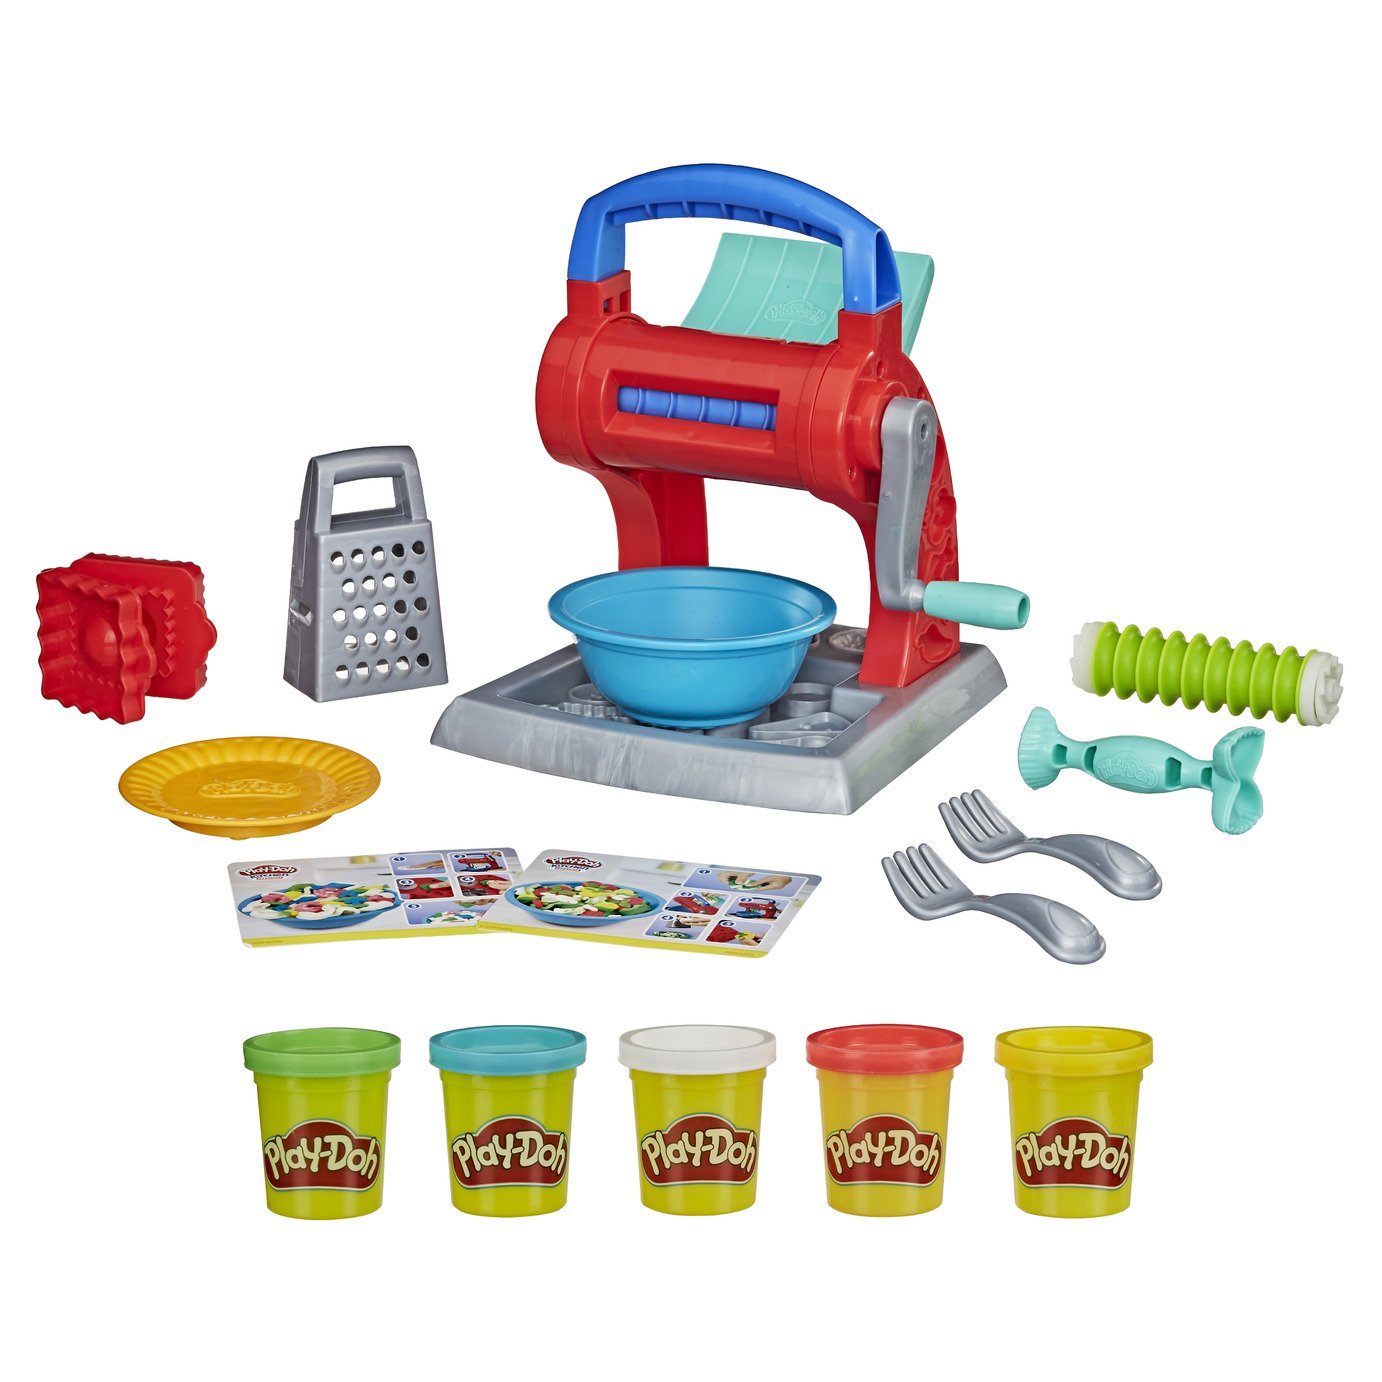 Play-Doh Kitchen Creations Noodle Party Playset Review